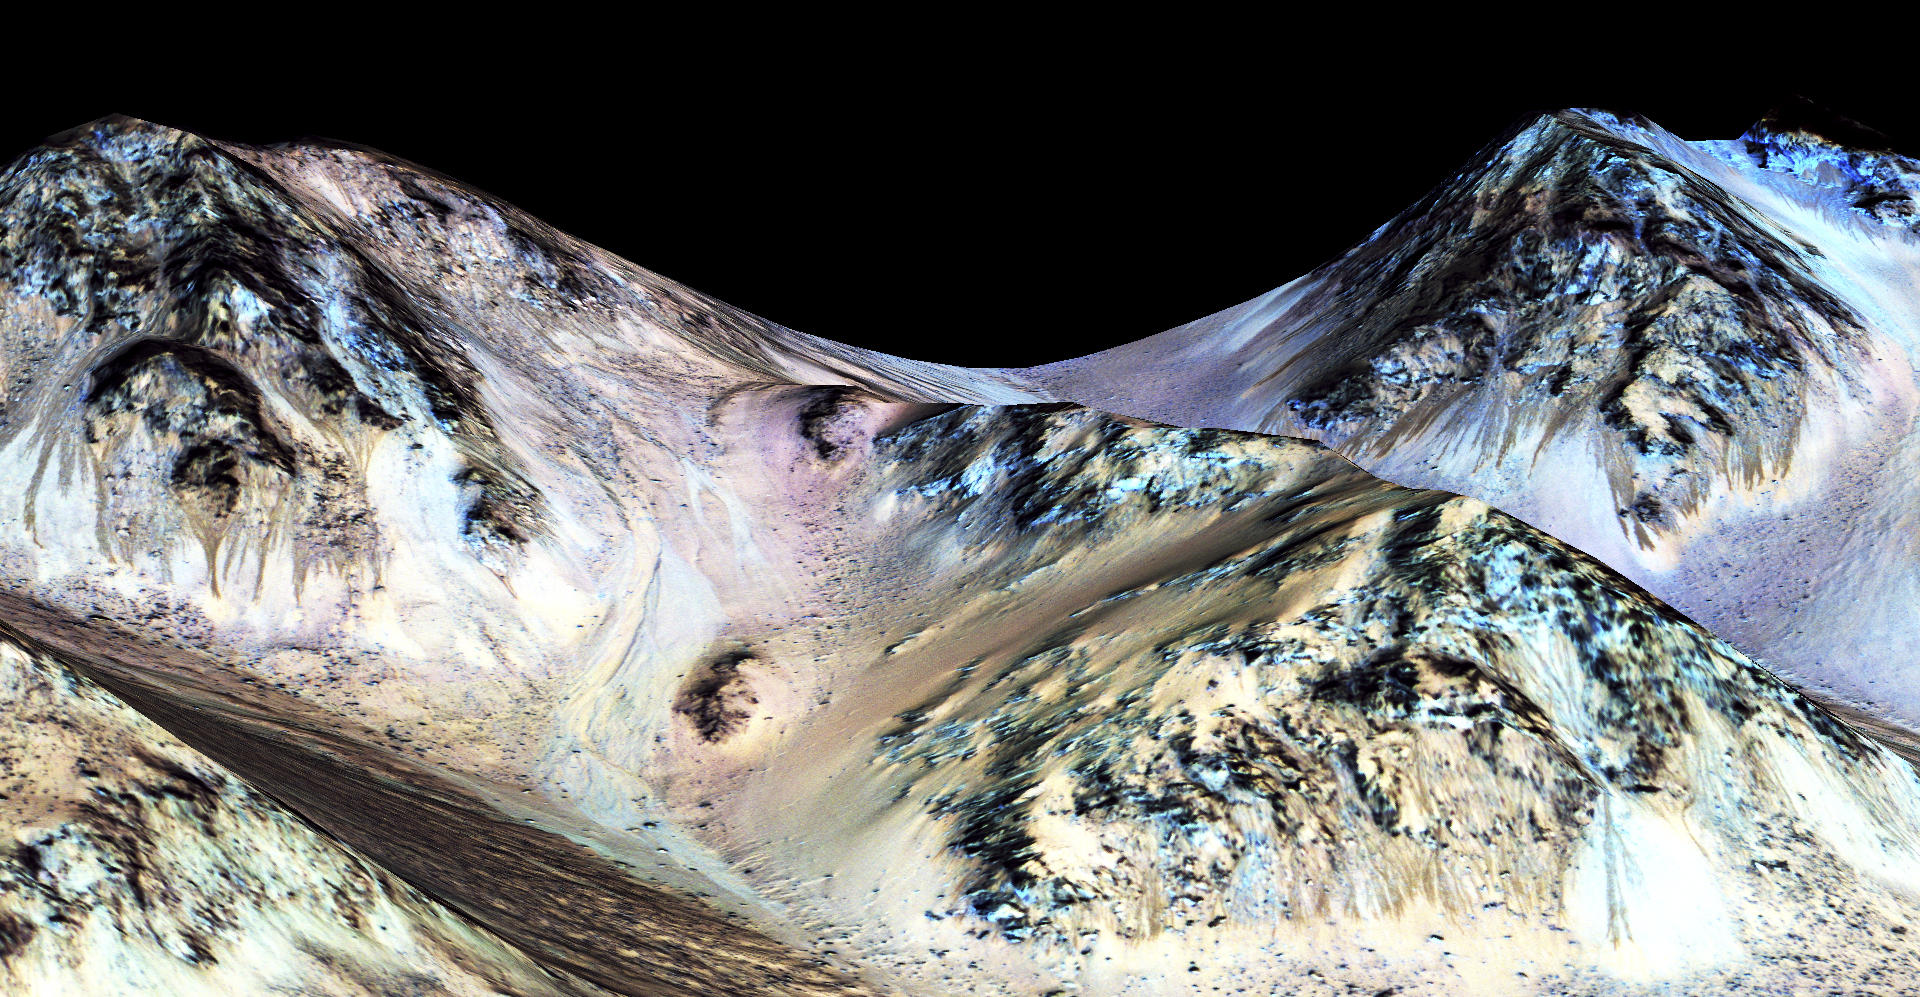 False-color photo of streaks, believed to be flowing water on Mars, at Hale Crater. Image credit: NASA/JPL/University of Arizona